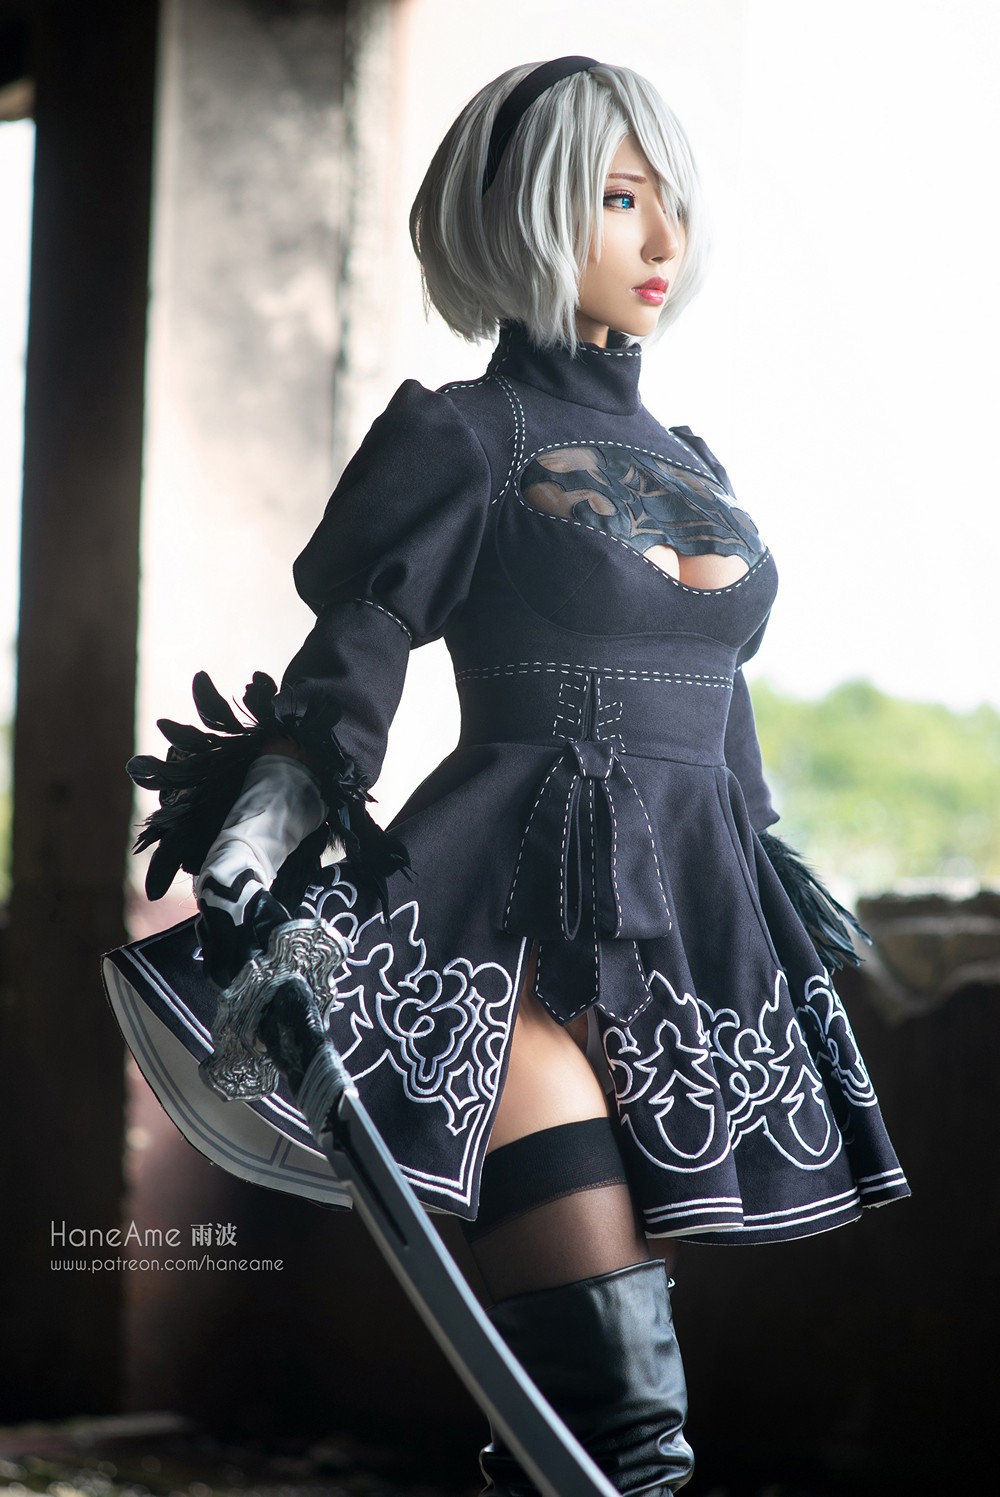 HaneAme 雨波 2 - COSPLAY -